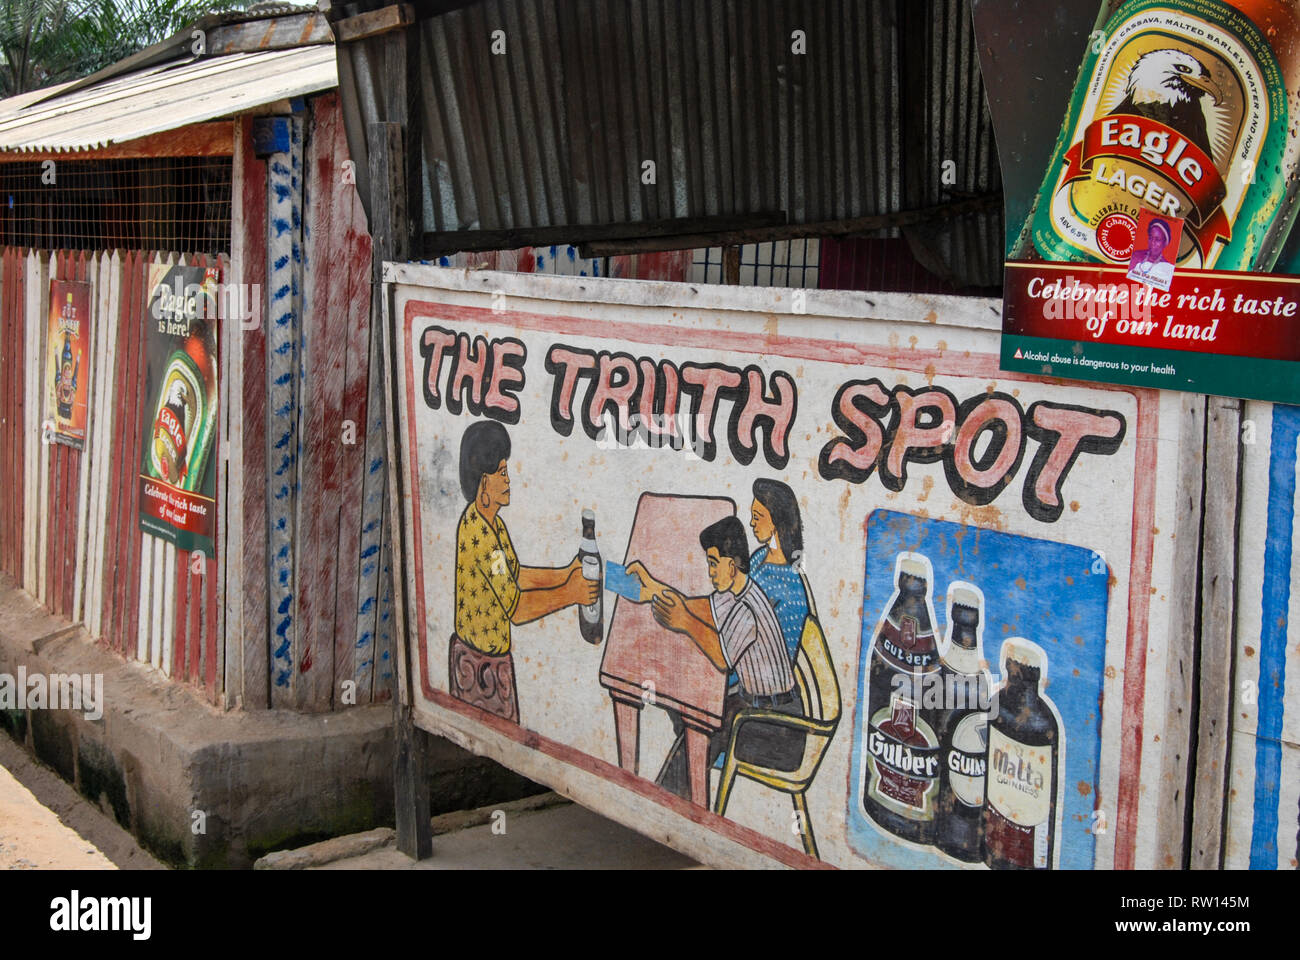 A street photo of the facade and advertisement sign of a local pub or bar called The truth spot in the Ghanaian town of Elmina, West Africa Stock Photo